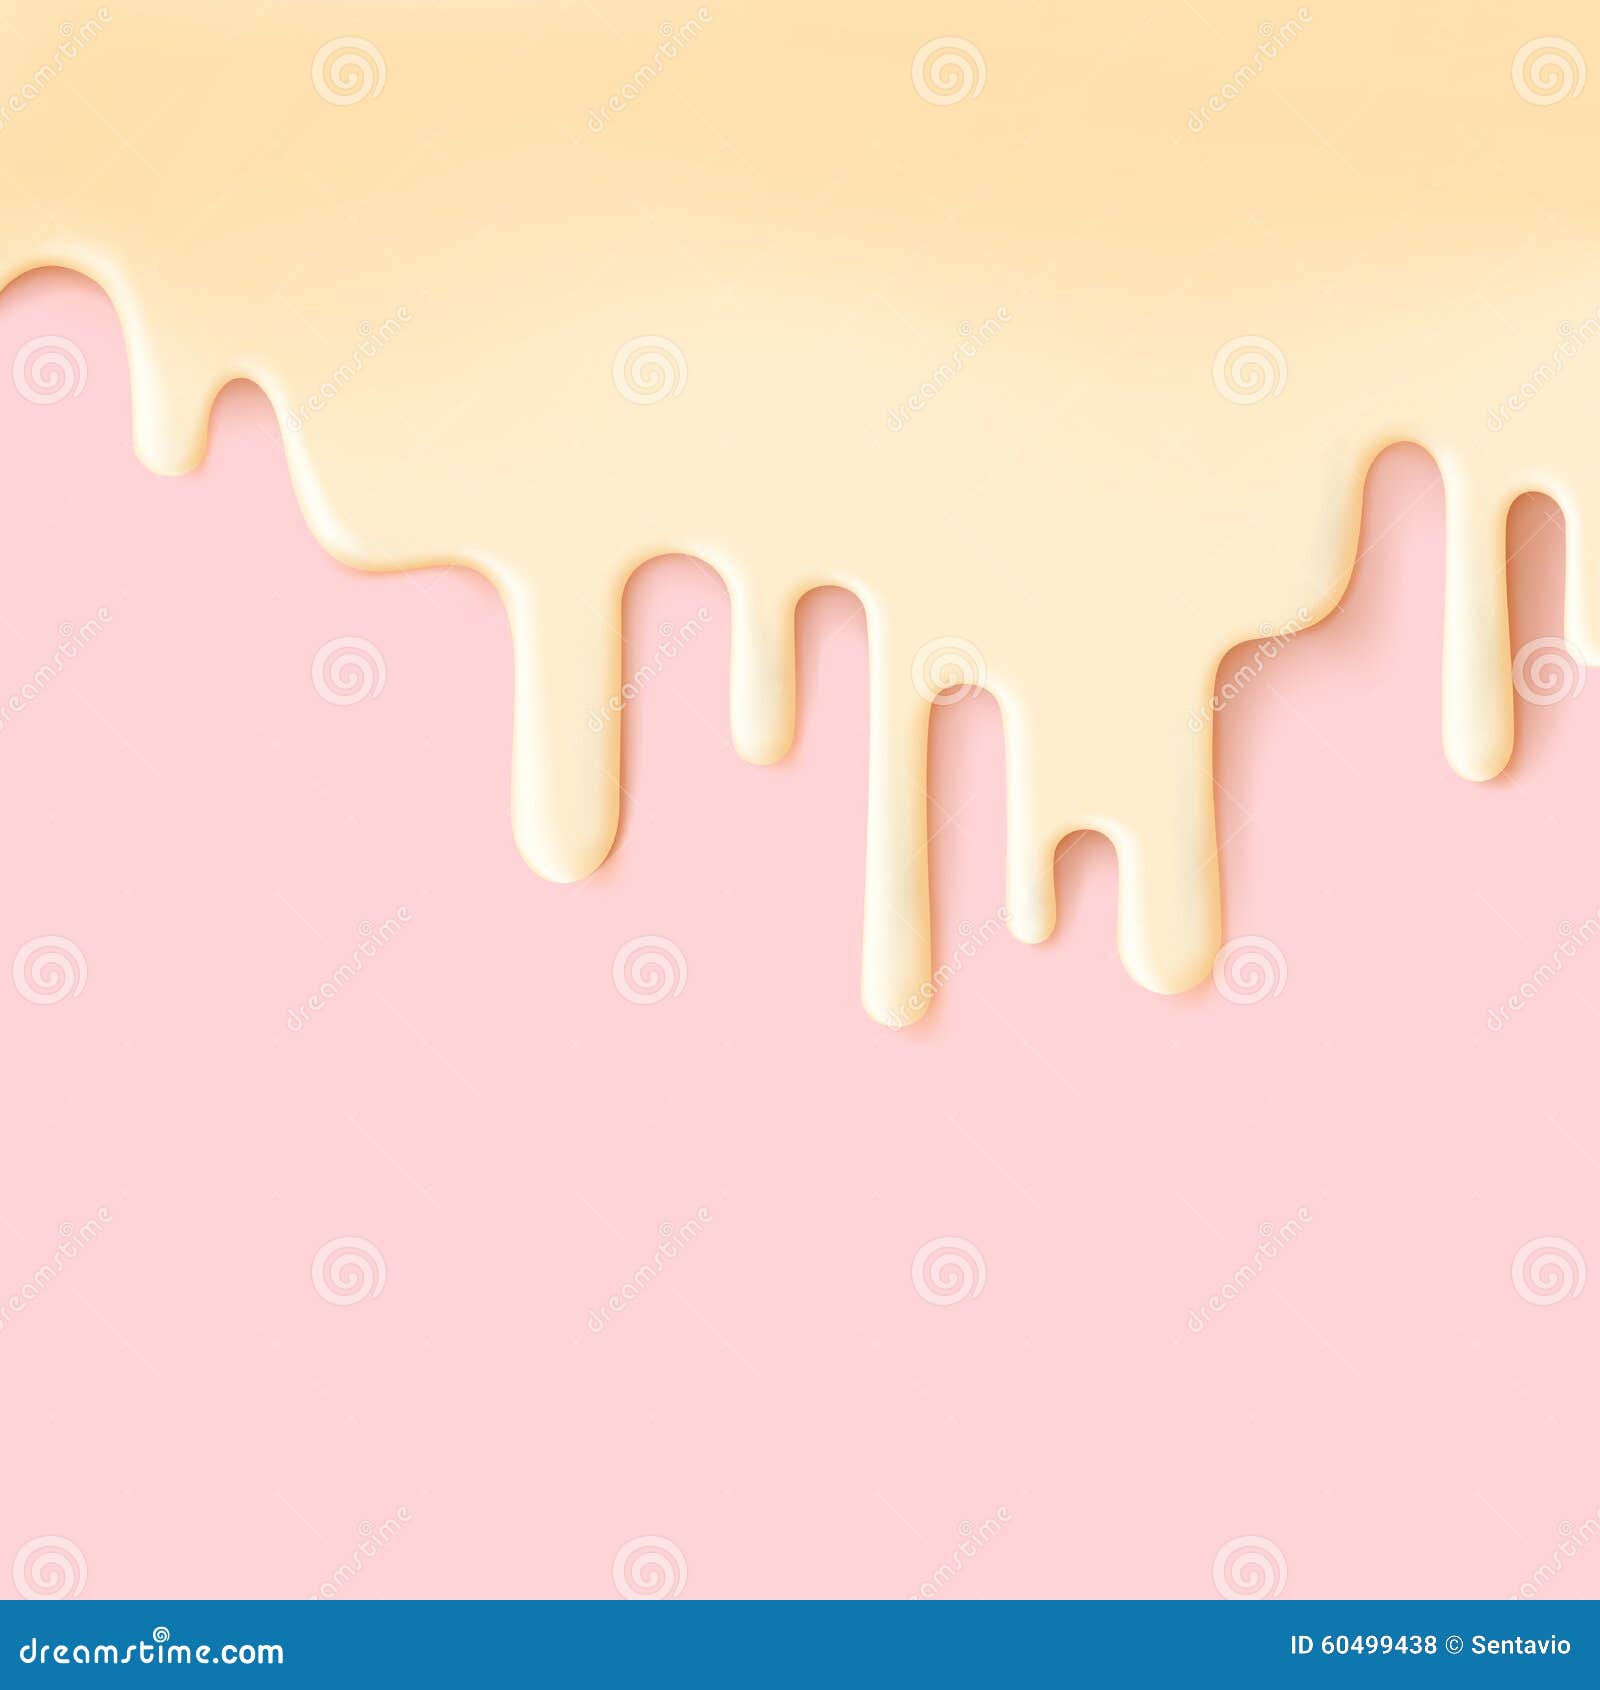 flowing creme glaze sweet food background abstract